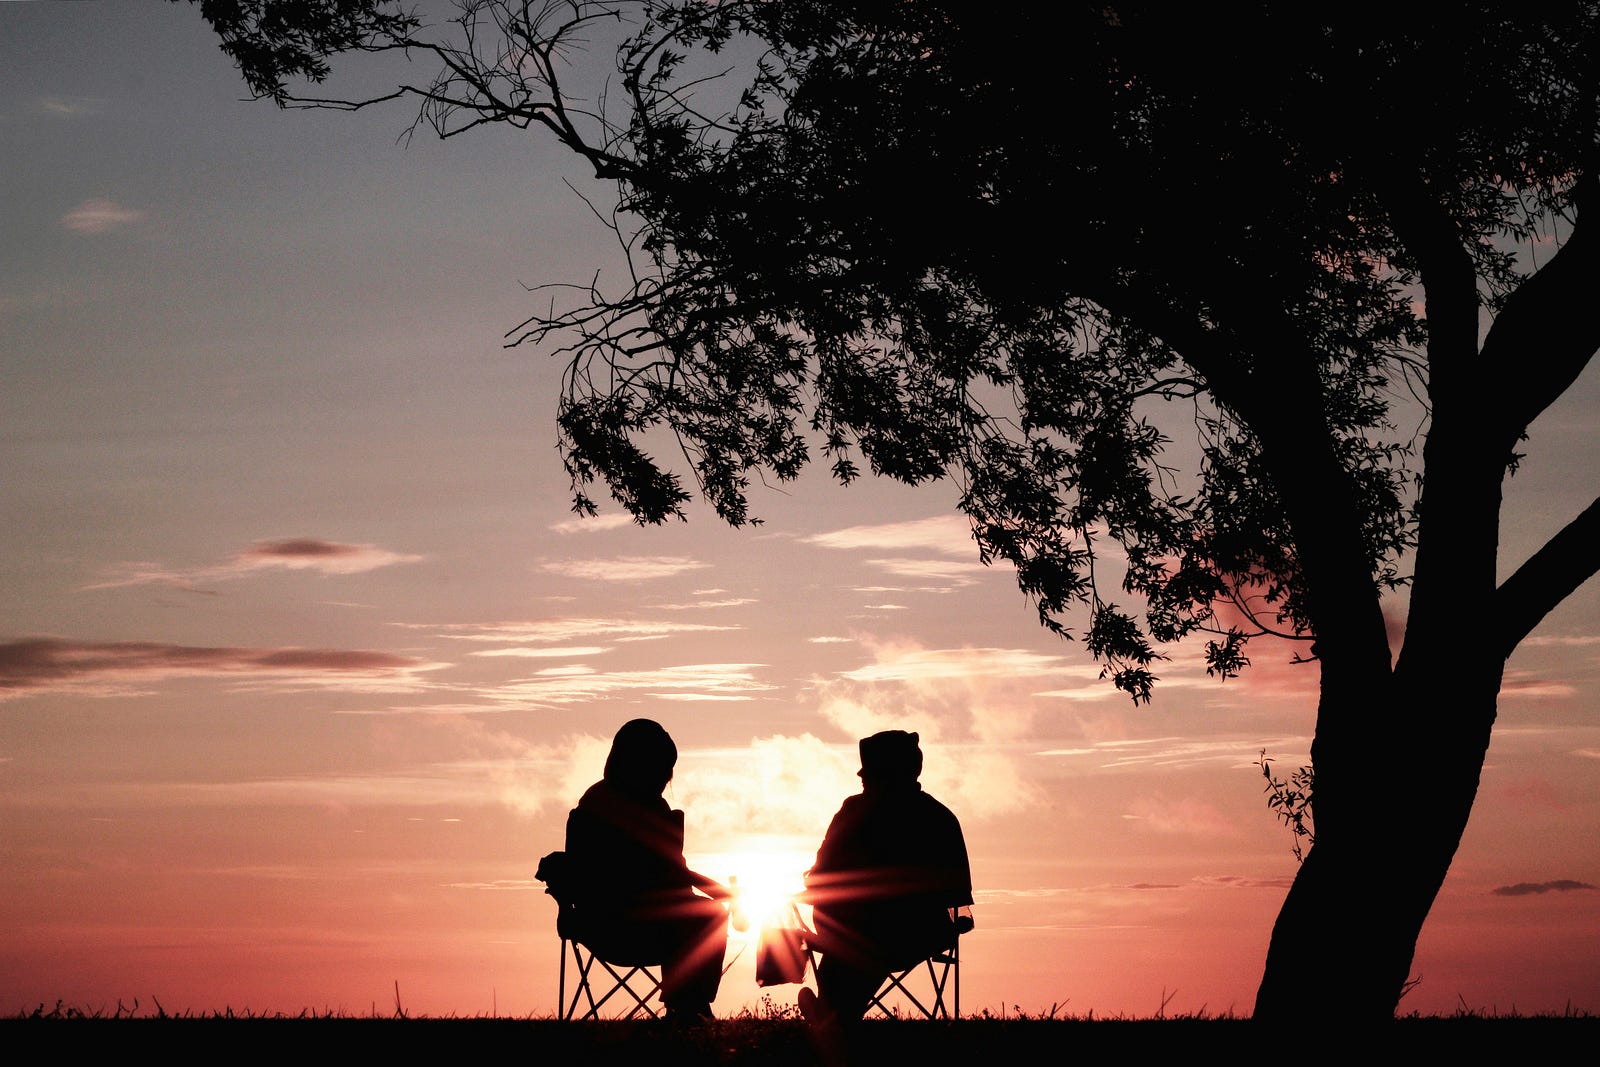 Two older people sit in silhouette under a tree, facing away from us, as the sun sits in the distance.